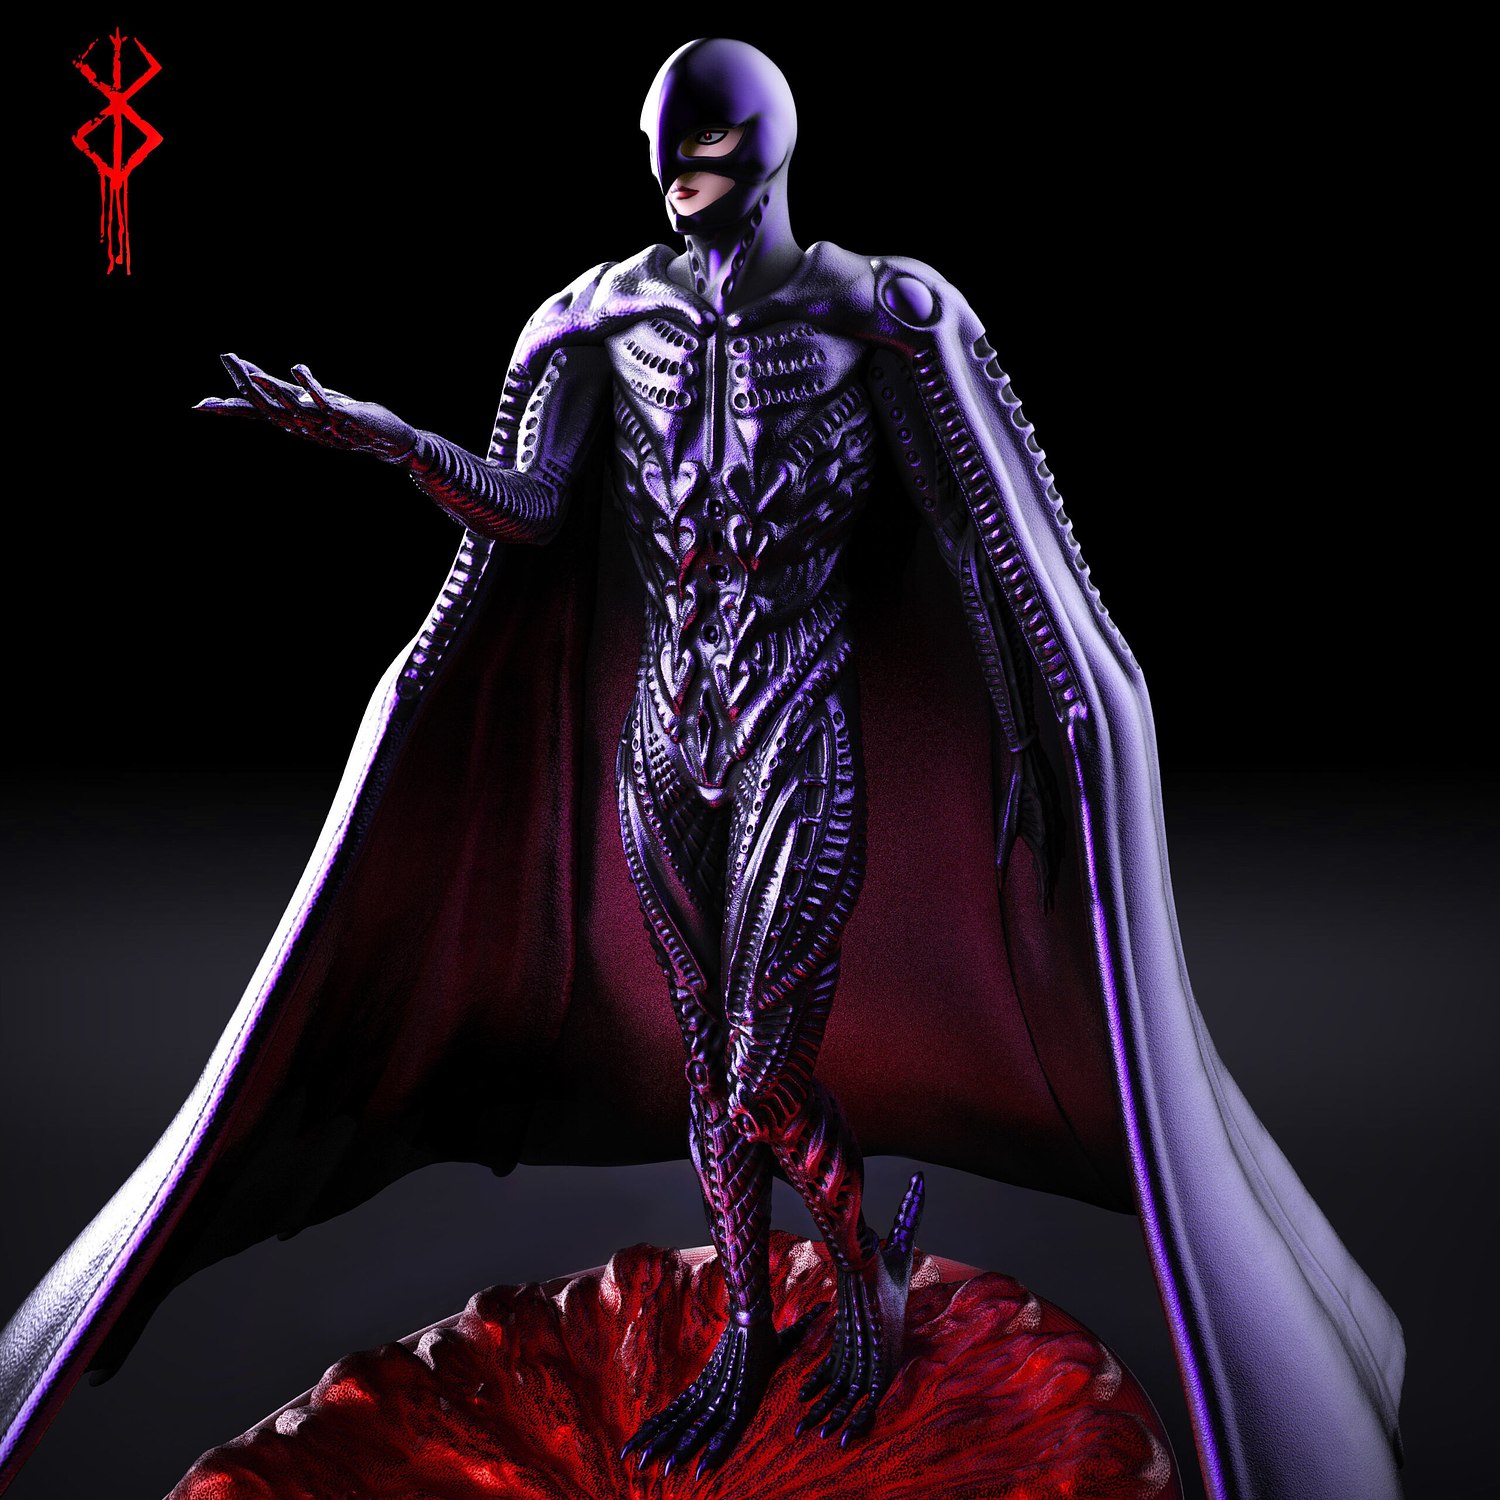 Femto and Griffith From Berserk